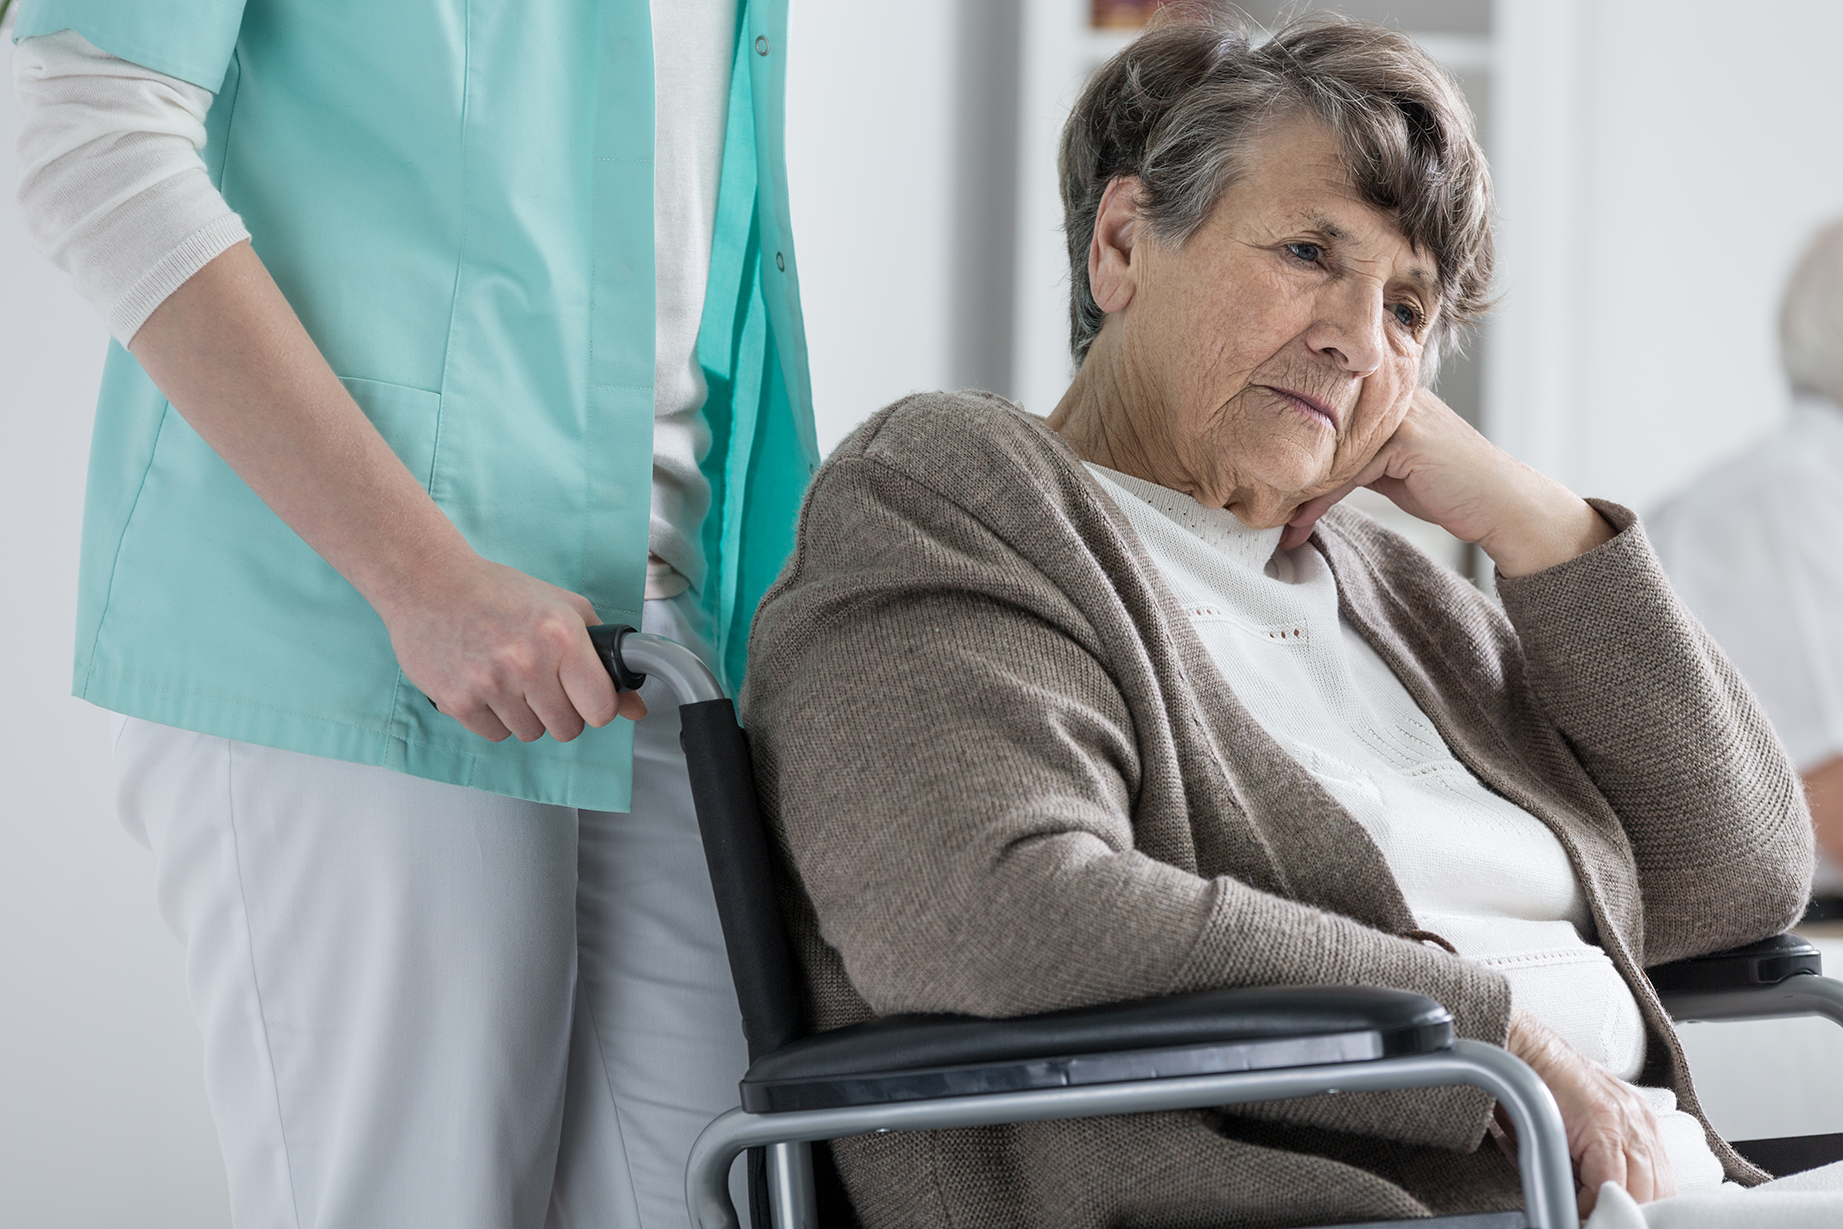 Tens of thousands of serious incidents reported to aged care watchdog